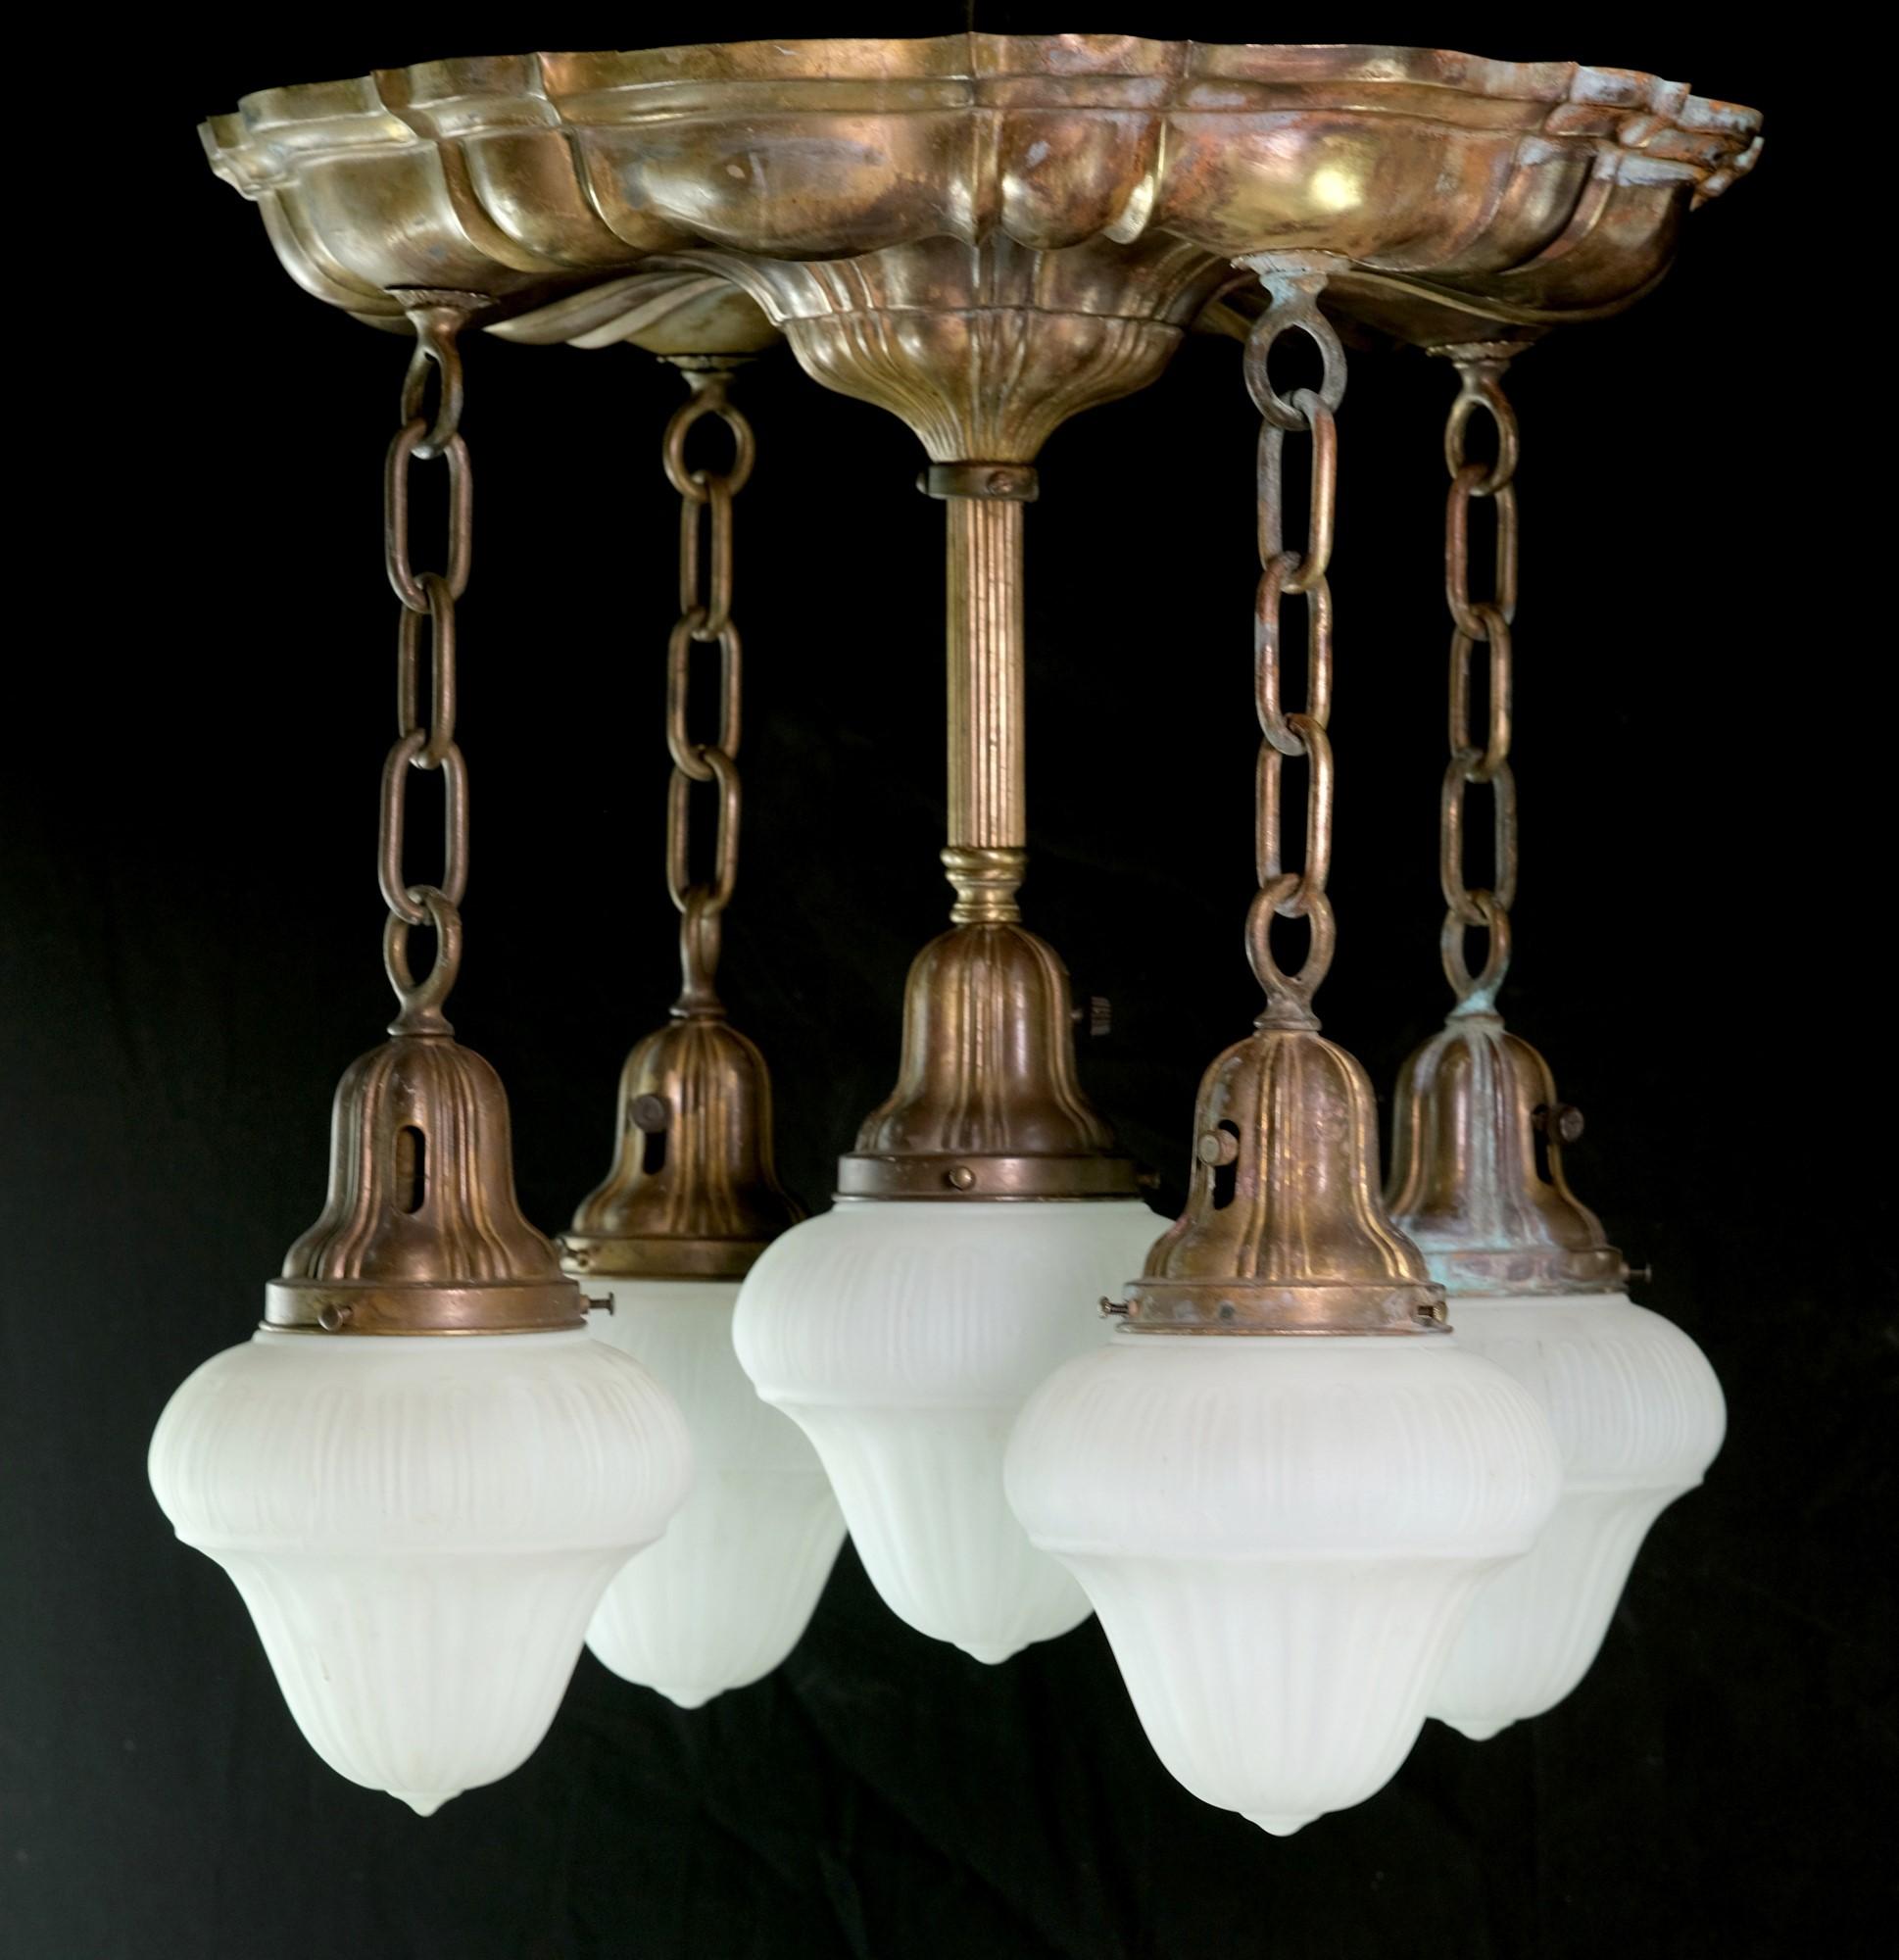 1910s Sheffield brass chandelier featuring five down lights with matching white frosted glass shades. This can be seen at our 400 Gilligan St location in Scranton, PA.